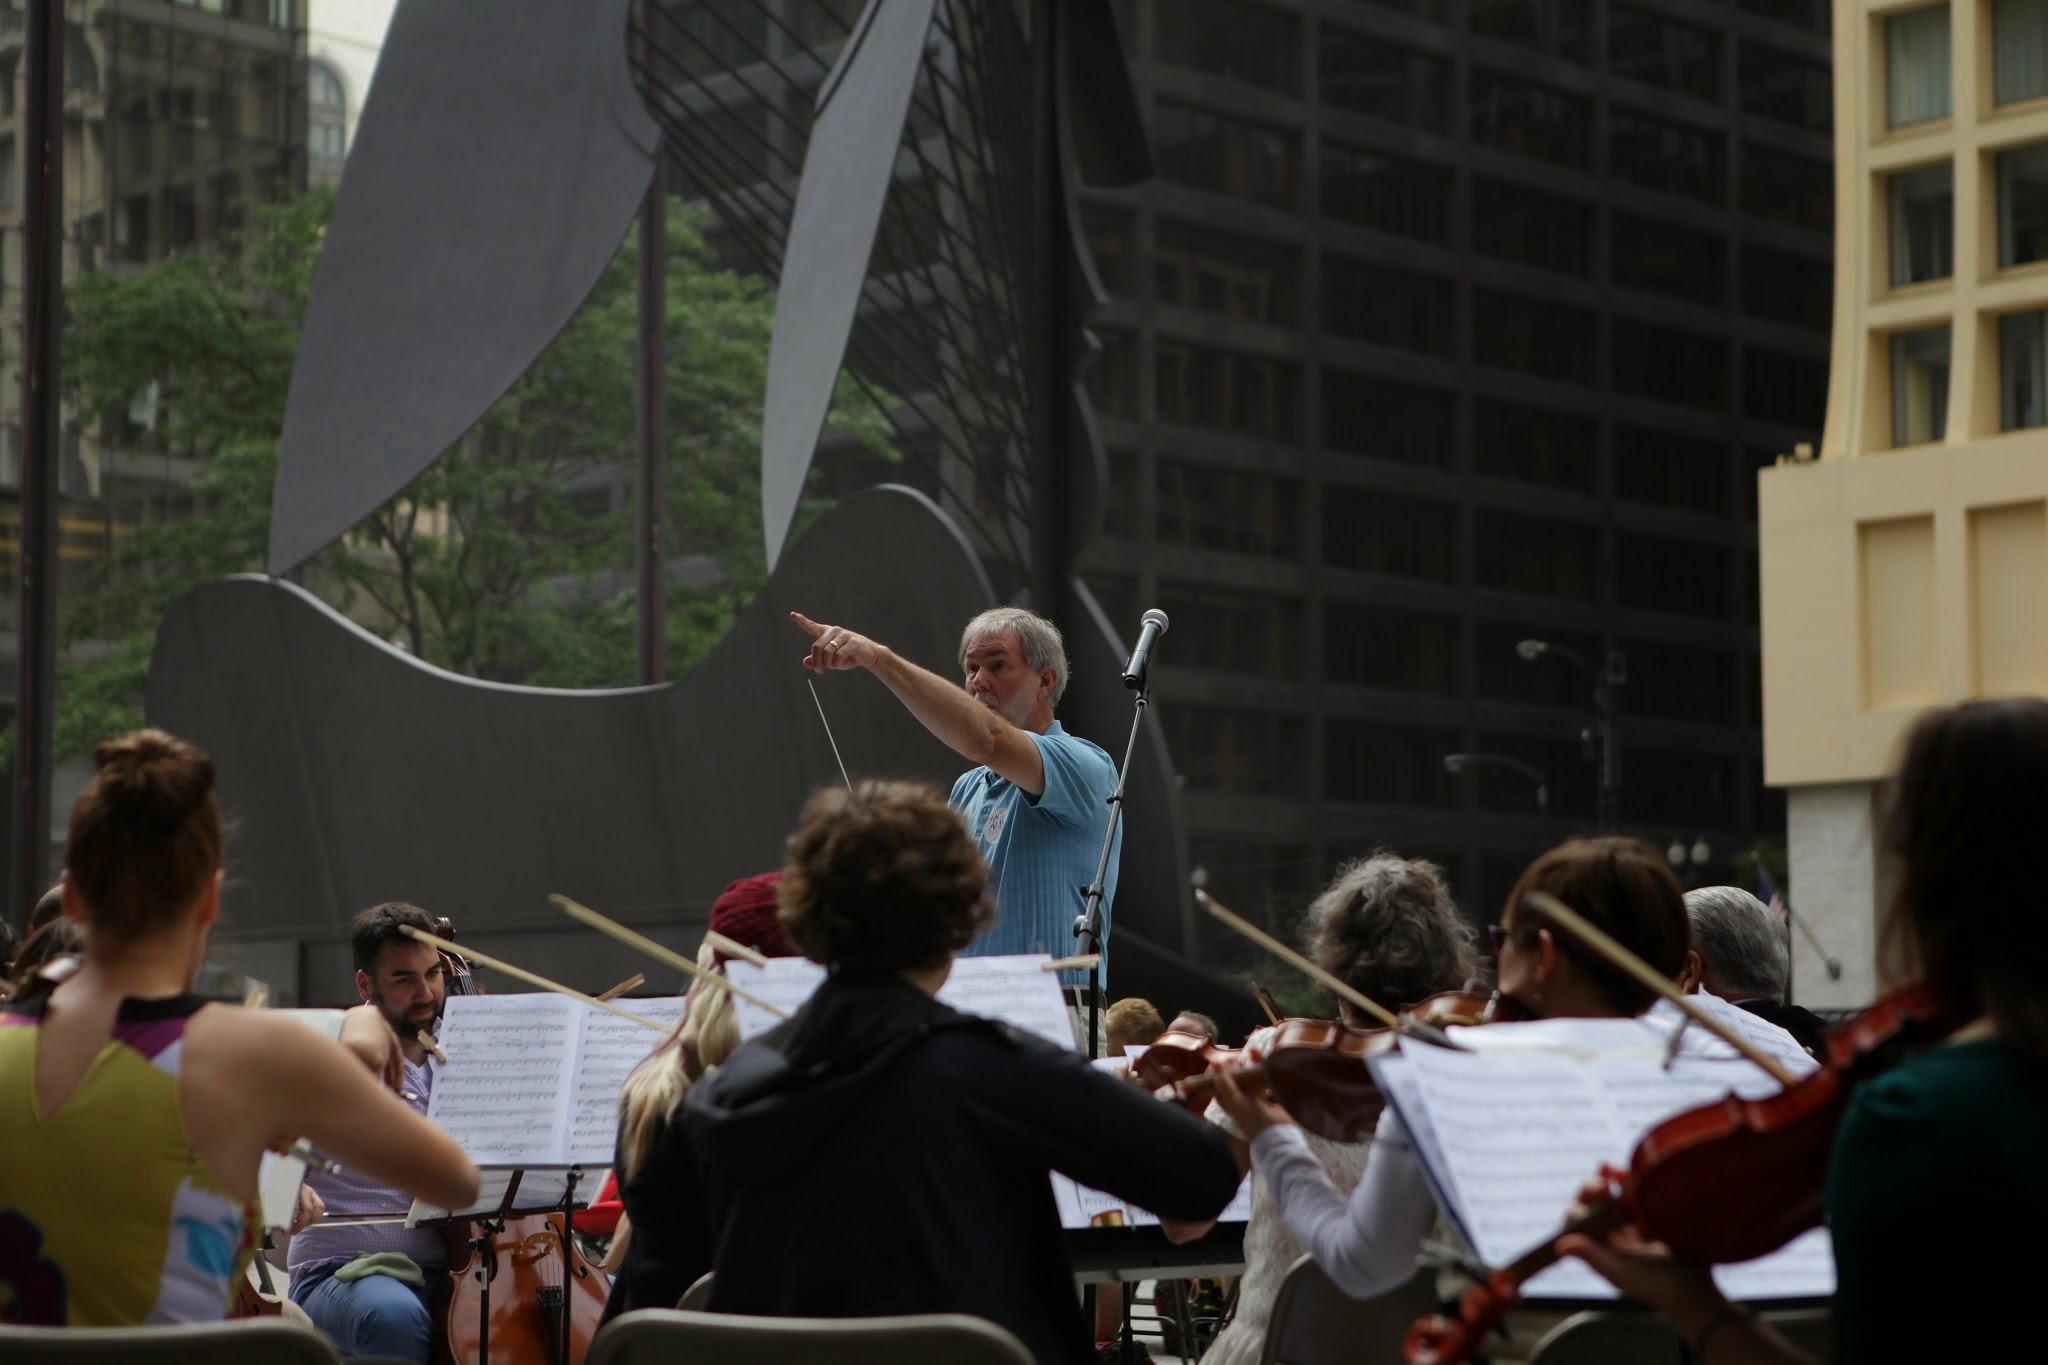 MAKE MUSIC CHICAGO Celebrates 5th Year of Free Day-Long, Citywide Music Event on Sunday, June 21, 2015 12 In conjunction with its upcoming production of Tim Robbins’ Dead Man Walking, April 14-May 15, 2016, Piven Theatre Workshop proudly announces The Quality of Mercy Project, an expansive three-month public programming initiative inviting discussion of the complex issues arising from the themes of the play, including, but certainly not limited to: forgiveness, compassion, the death penalty, mass incarceration, racial inequity, and social justice.  Among highlights of The Quality of Mercy Project are panel discussions addressing Life and Death in the Criminal Justice System, Finding a Path Where Forgiveness and Justice Can Intersect, and The Black Male Experience in Evanston; a screening and discussion of The Innocent, a documentary about men and women wrongly sentenced to death who lived to tell about it; and a special reading and book signing with Sister Helen Prejean whose best-selling book, Dead Man Walking: The Eyewitness Account of the Death Penalty That Sparked a National Debate,has been adapted for the stage.